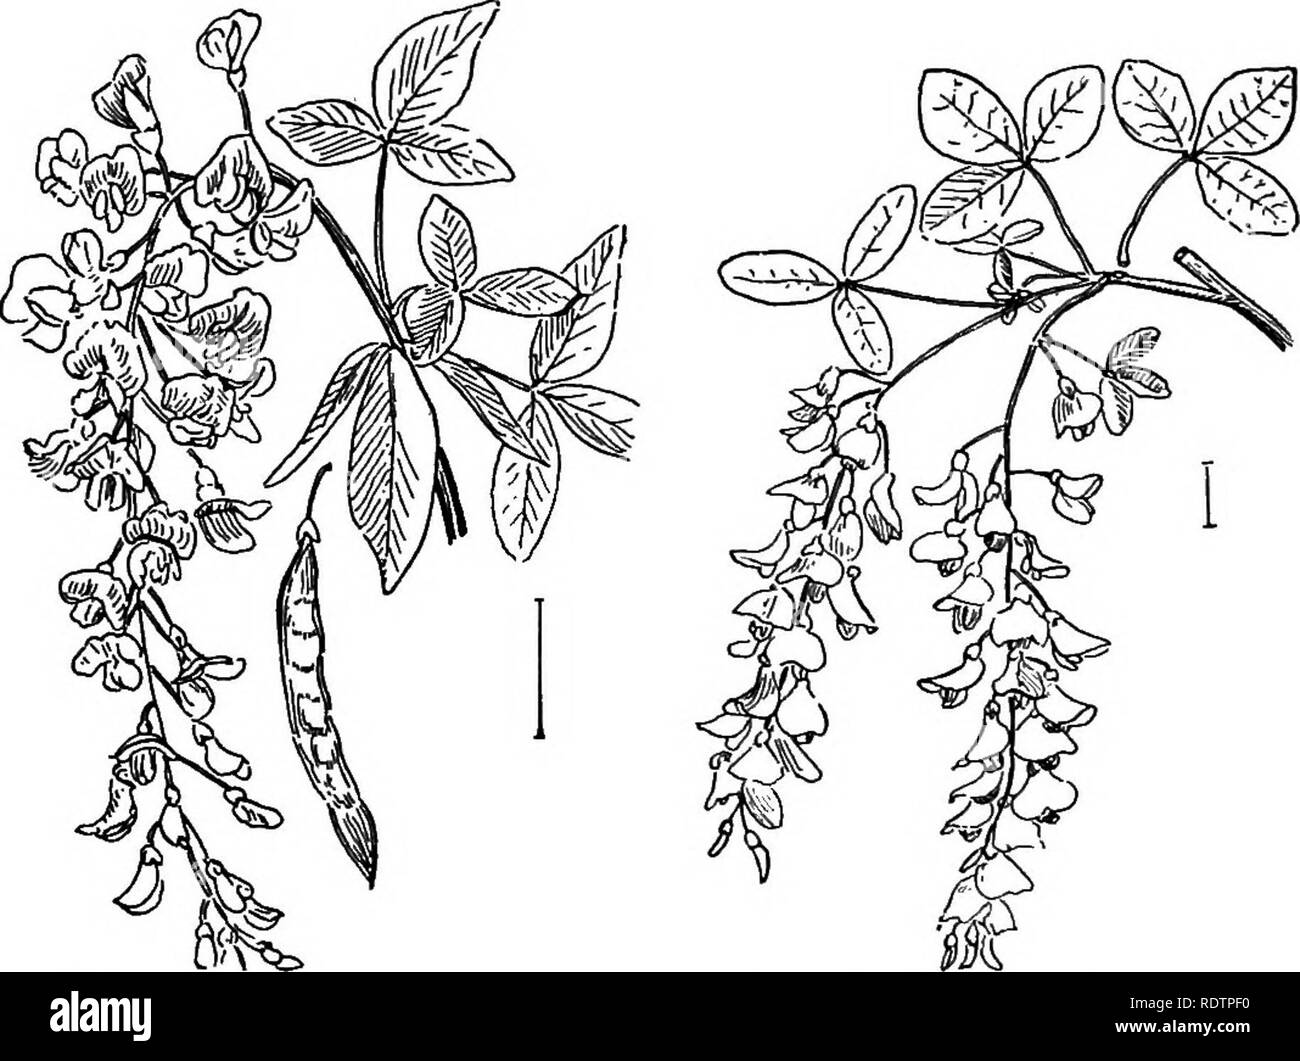 . Ornamental shrubs of the United States (hardy, cultivated). Shrubs. 116 DESCRIPTIONS OF THE SHRUBS D. Leaves deciduous, blades ^1 inch long; branches round, pubes- cent; racemes slender, — 3-8 inches long, June, July ; hardy to middle states. Black-rooted Broom — Cytisus nigricans. D. Leaves deciduous of one lanceolate blade; branches grooved, green; flowers small. In early summer ; plant 1-2 feet. Whin or Dyer's Gkeeitweed (129) — Genista tinctbria. D. Leaves almost entirely absent, found only on vigorous shoots near the ground; very spiny and rigid shrub; flowers fragrant, f inch long; cal Stock Photo